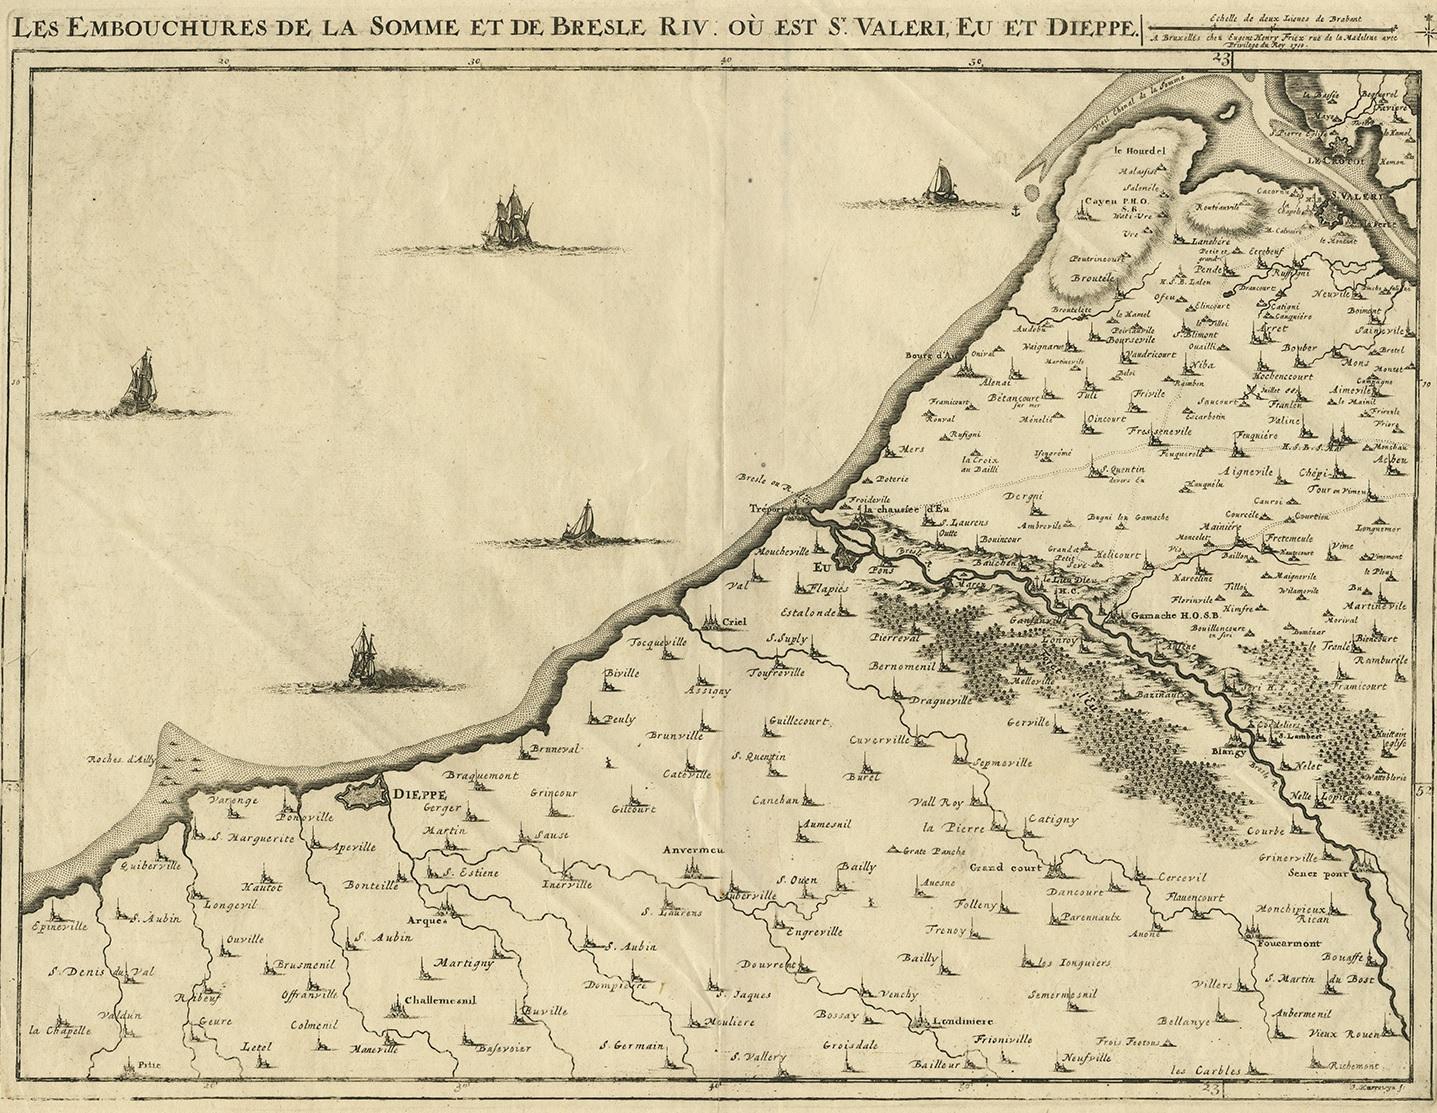 Antique map titled 'Les Embouchures de la Somme et de Bresle'. 

Map of the coast of Northern France showing the estuaries of the Somme and the Bresle. This map is part of a serie of maps that, together, show a very large part of the Southern